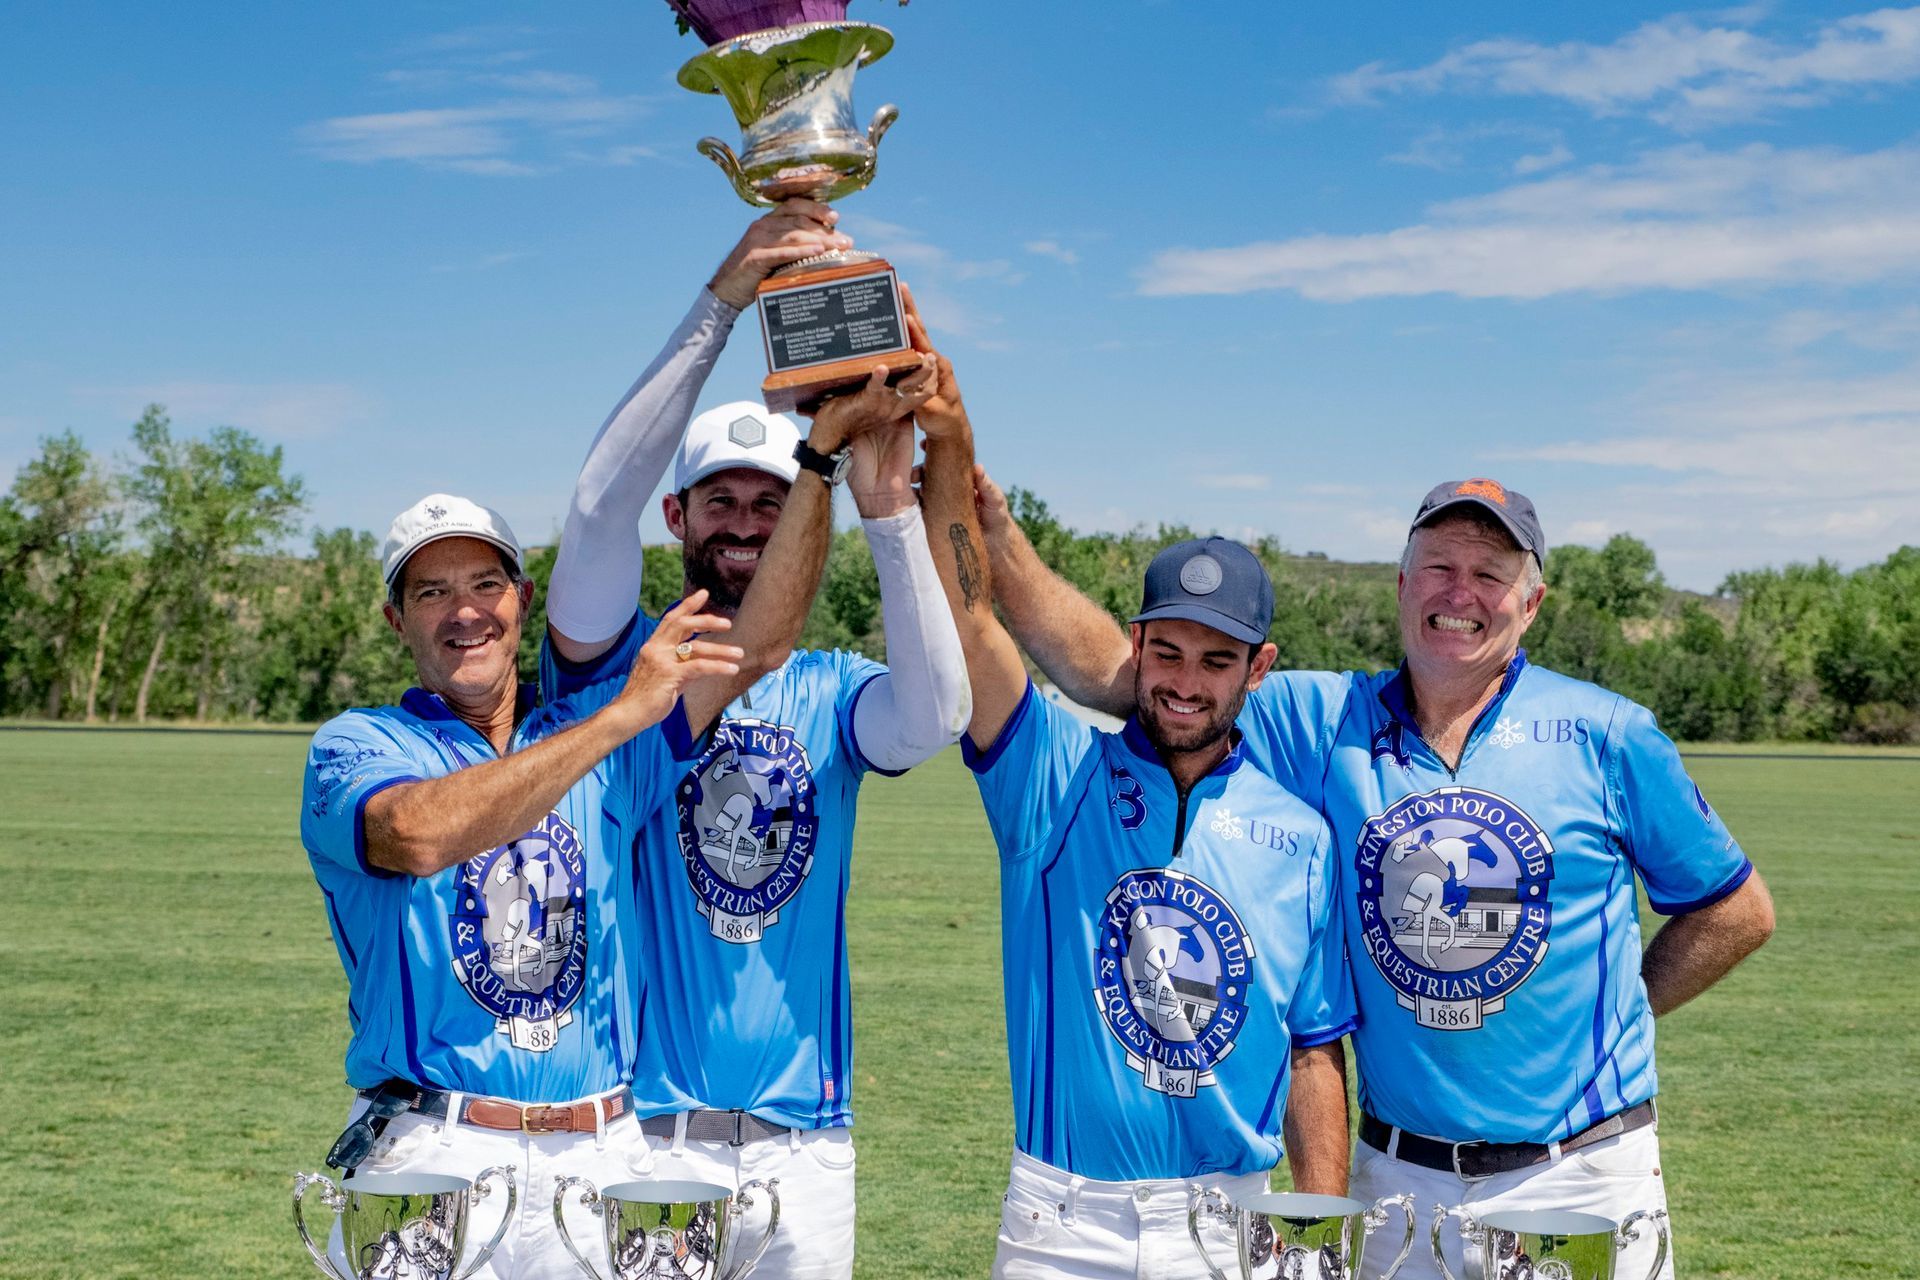 A group of men are holding up a trophy in a field.